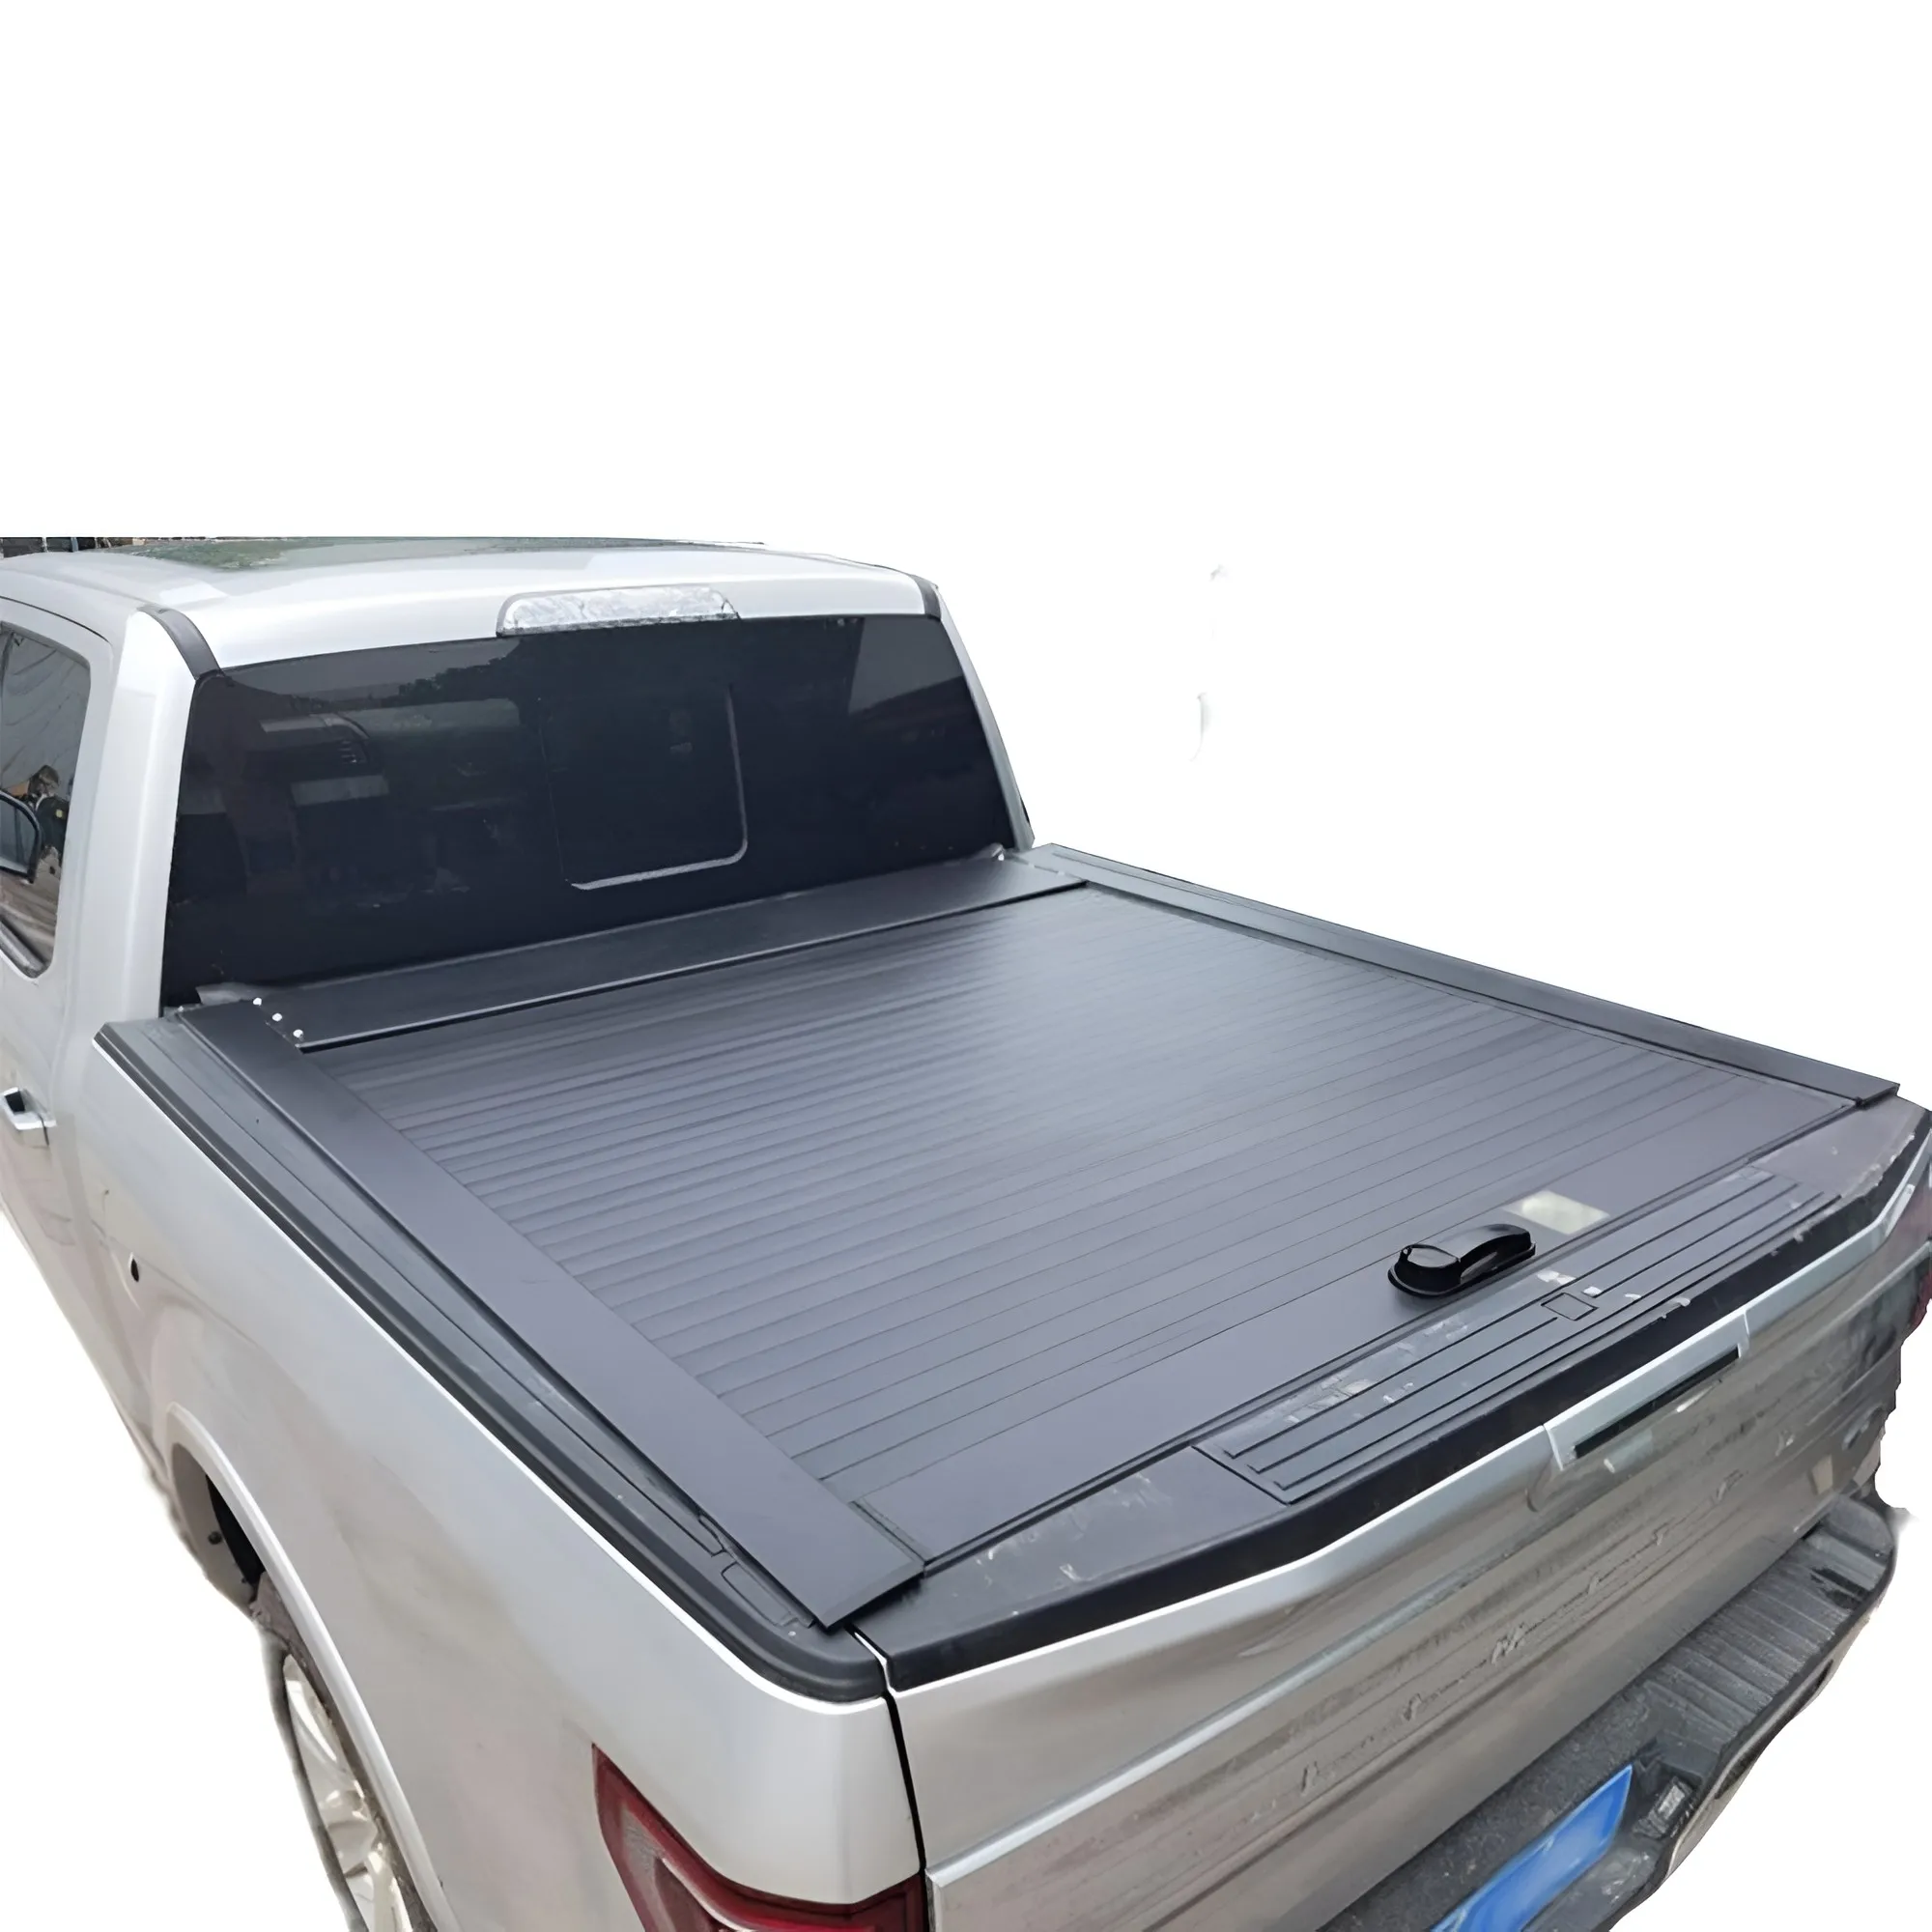 

Truck Accessories Hard Tri-Fold Tonneau Cover Pickup Truck Bed Covers Fit For Ford F150 5.5FT